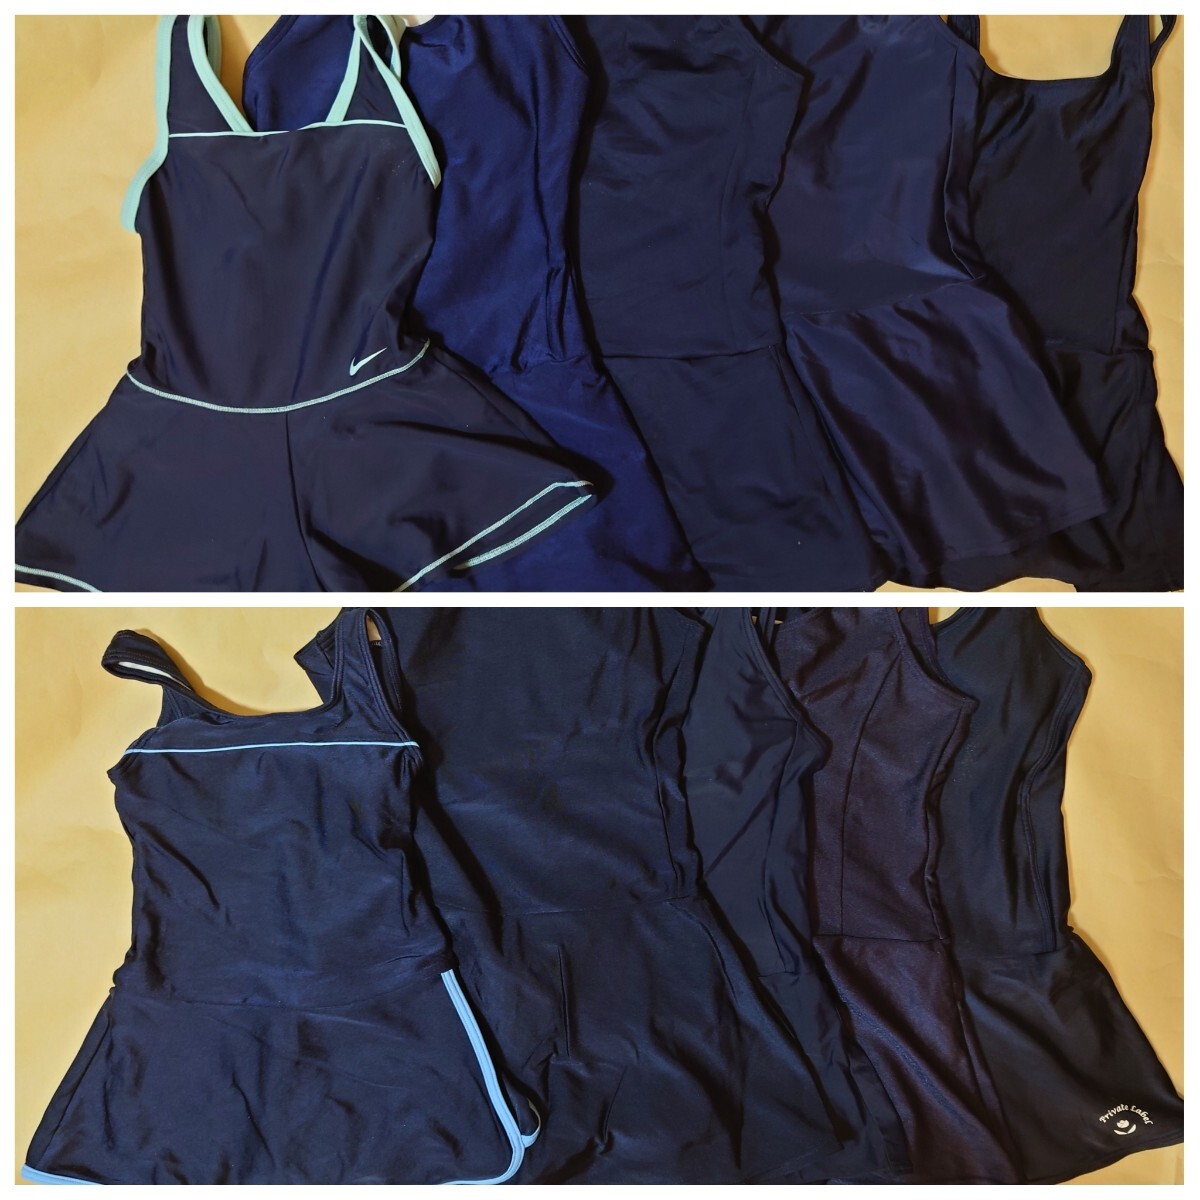 [ costume play clothes ] navy swimsuit 10 pieces set * One-piece swimsuit * culotte * skirt type swimsuit *120~-60 size *